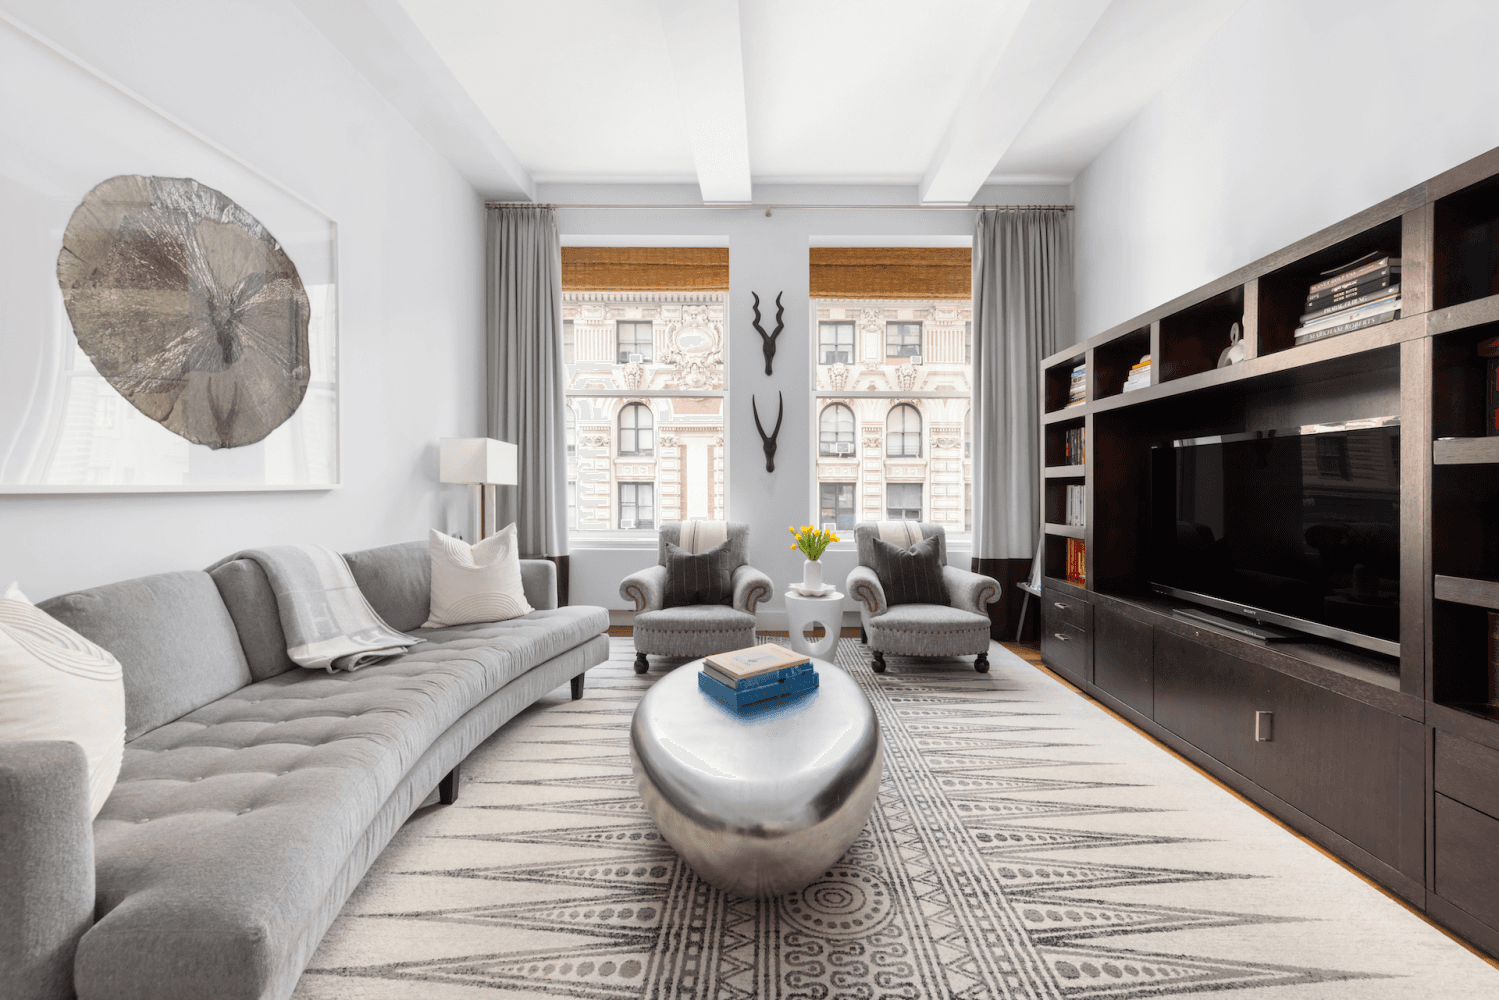 Situated in the heart of Madison Square Park, this sprawling luxury loft offers timeless elegance, space, and the ultimate in location.